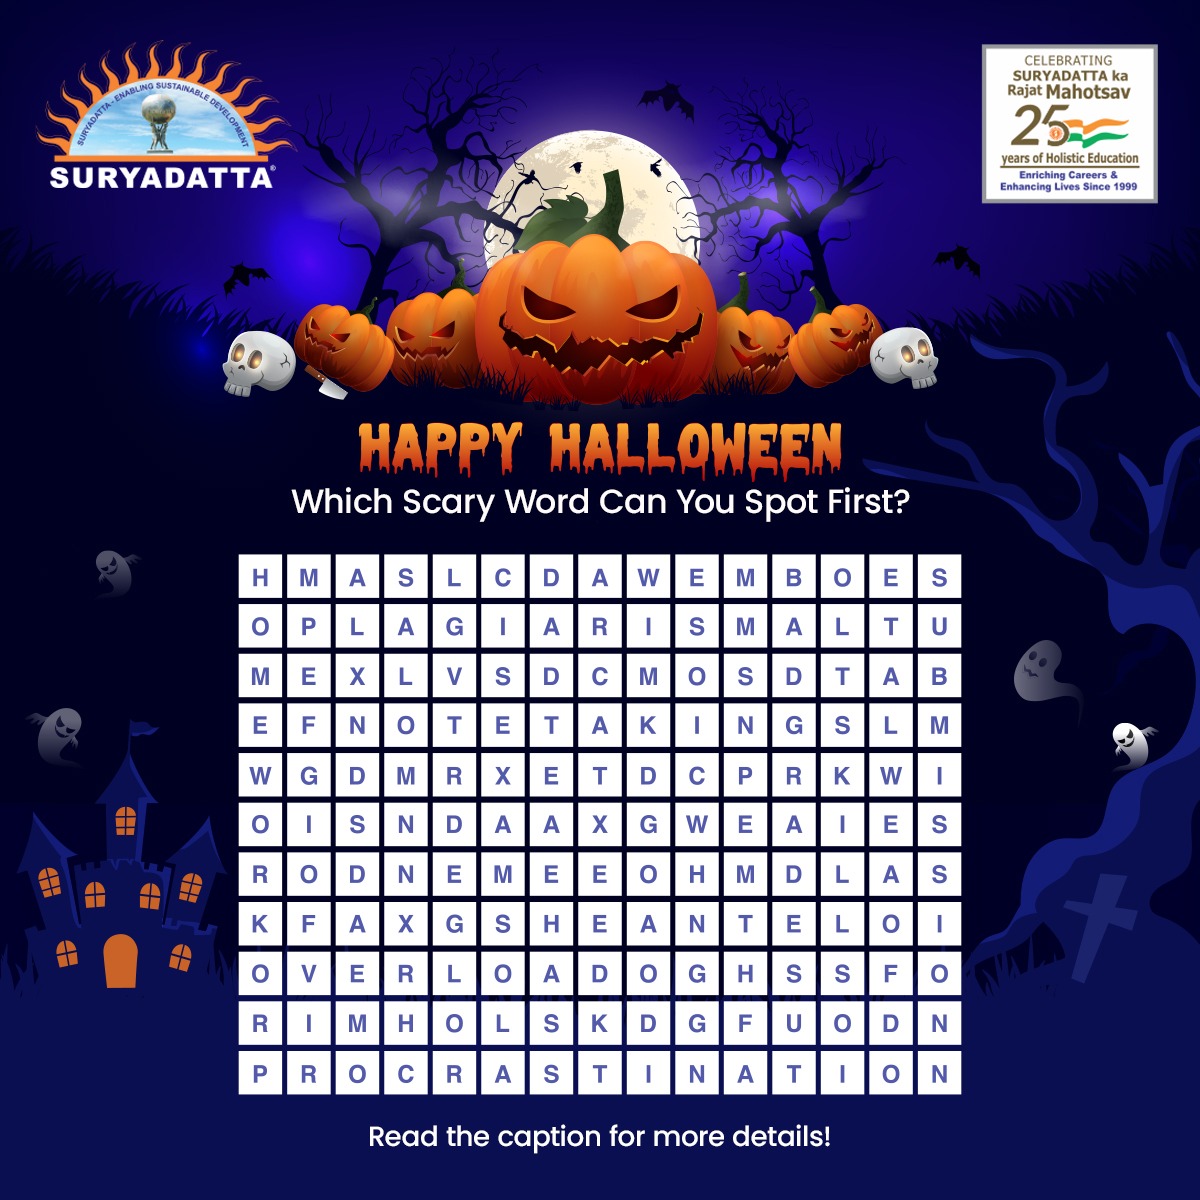 🎃 Happy #Halloween! 🎃 👻 Don't let #spooky #academicchallenges haunt you! 👻 At #Suryadatta Group of #Institutes, we believe in treating every student's concerns with care and support. 🎓 There are no tricks when it comes to #education, only treats! 🍬🎉 Happy Halloween! #SGI